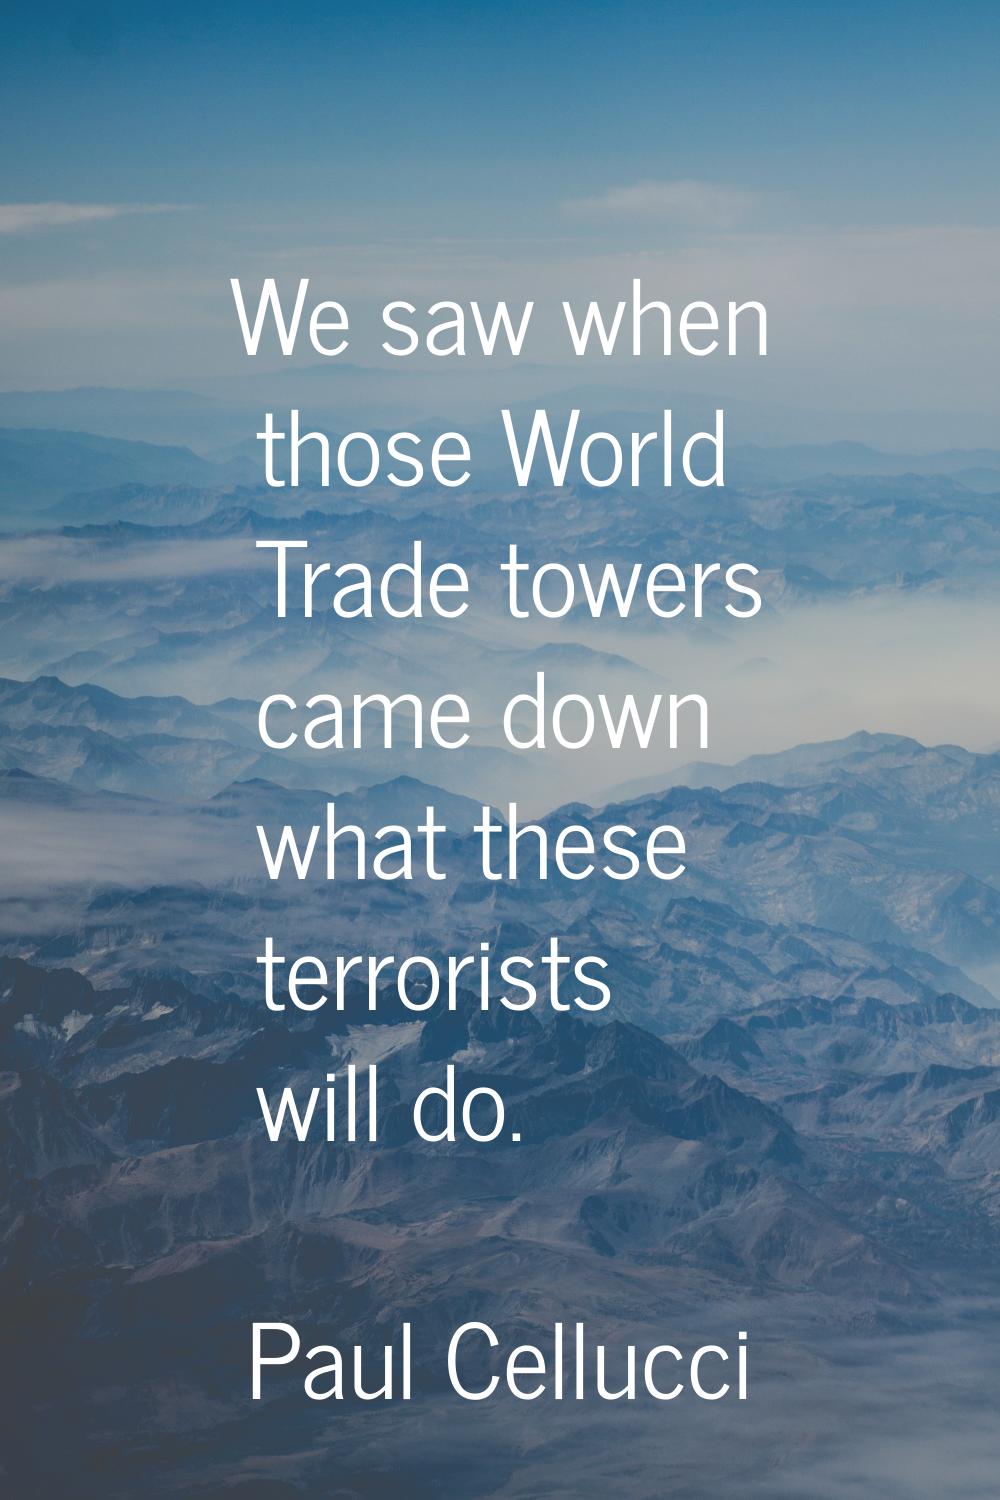 We saw when those World Trade towers came down what these terrorists will do.